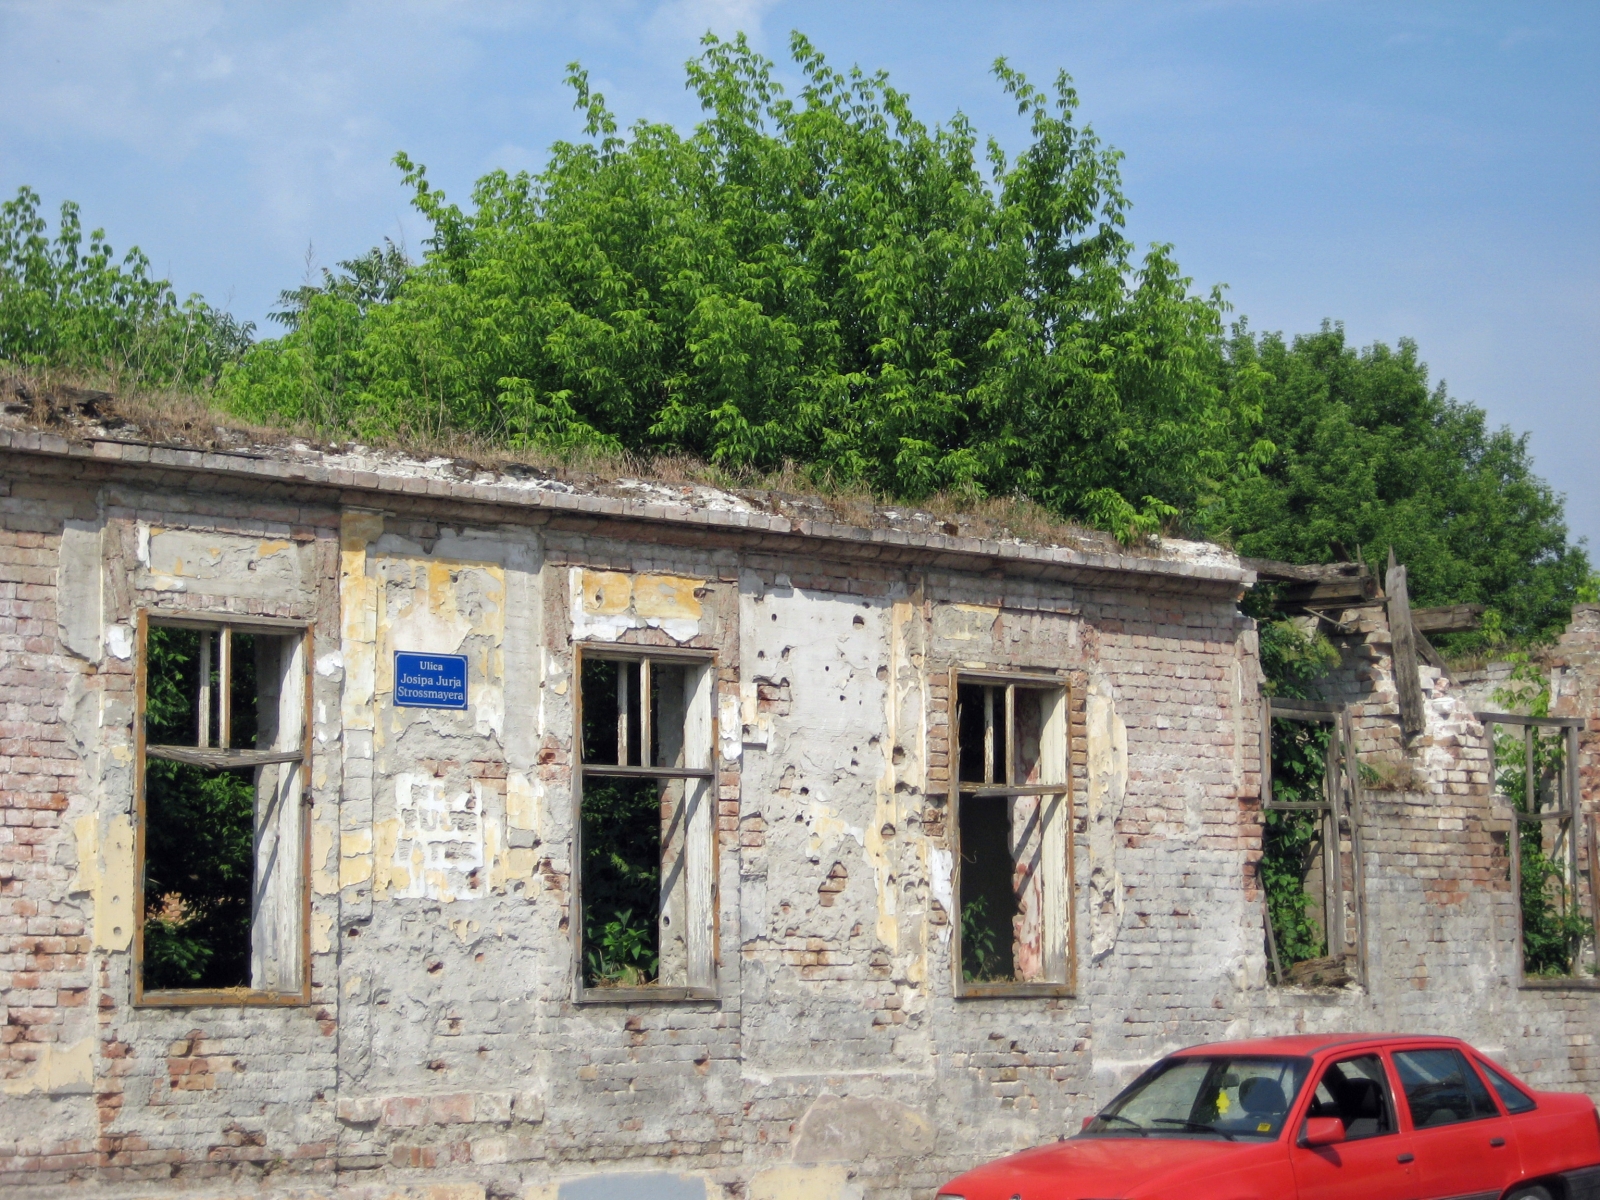 Nature taking over a bombed out building, Vukovar, Croatia